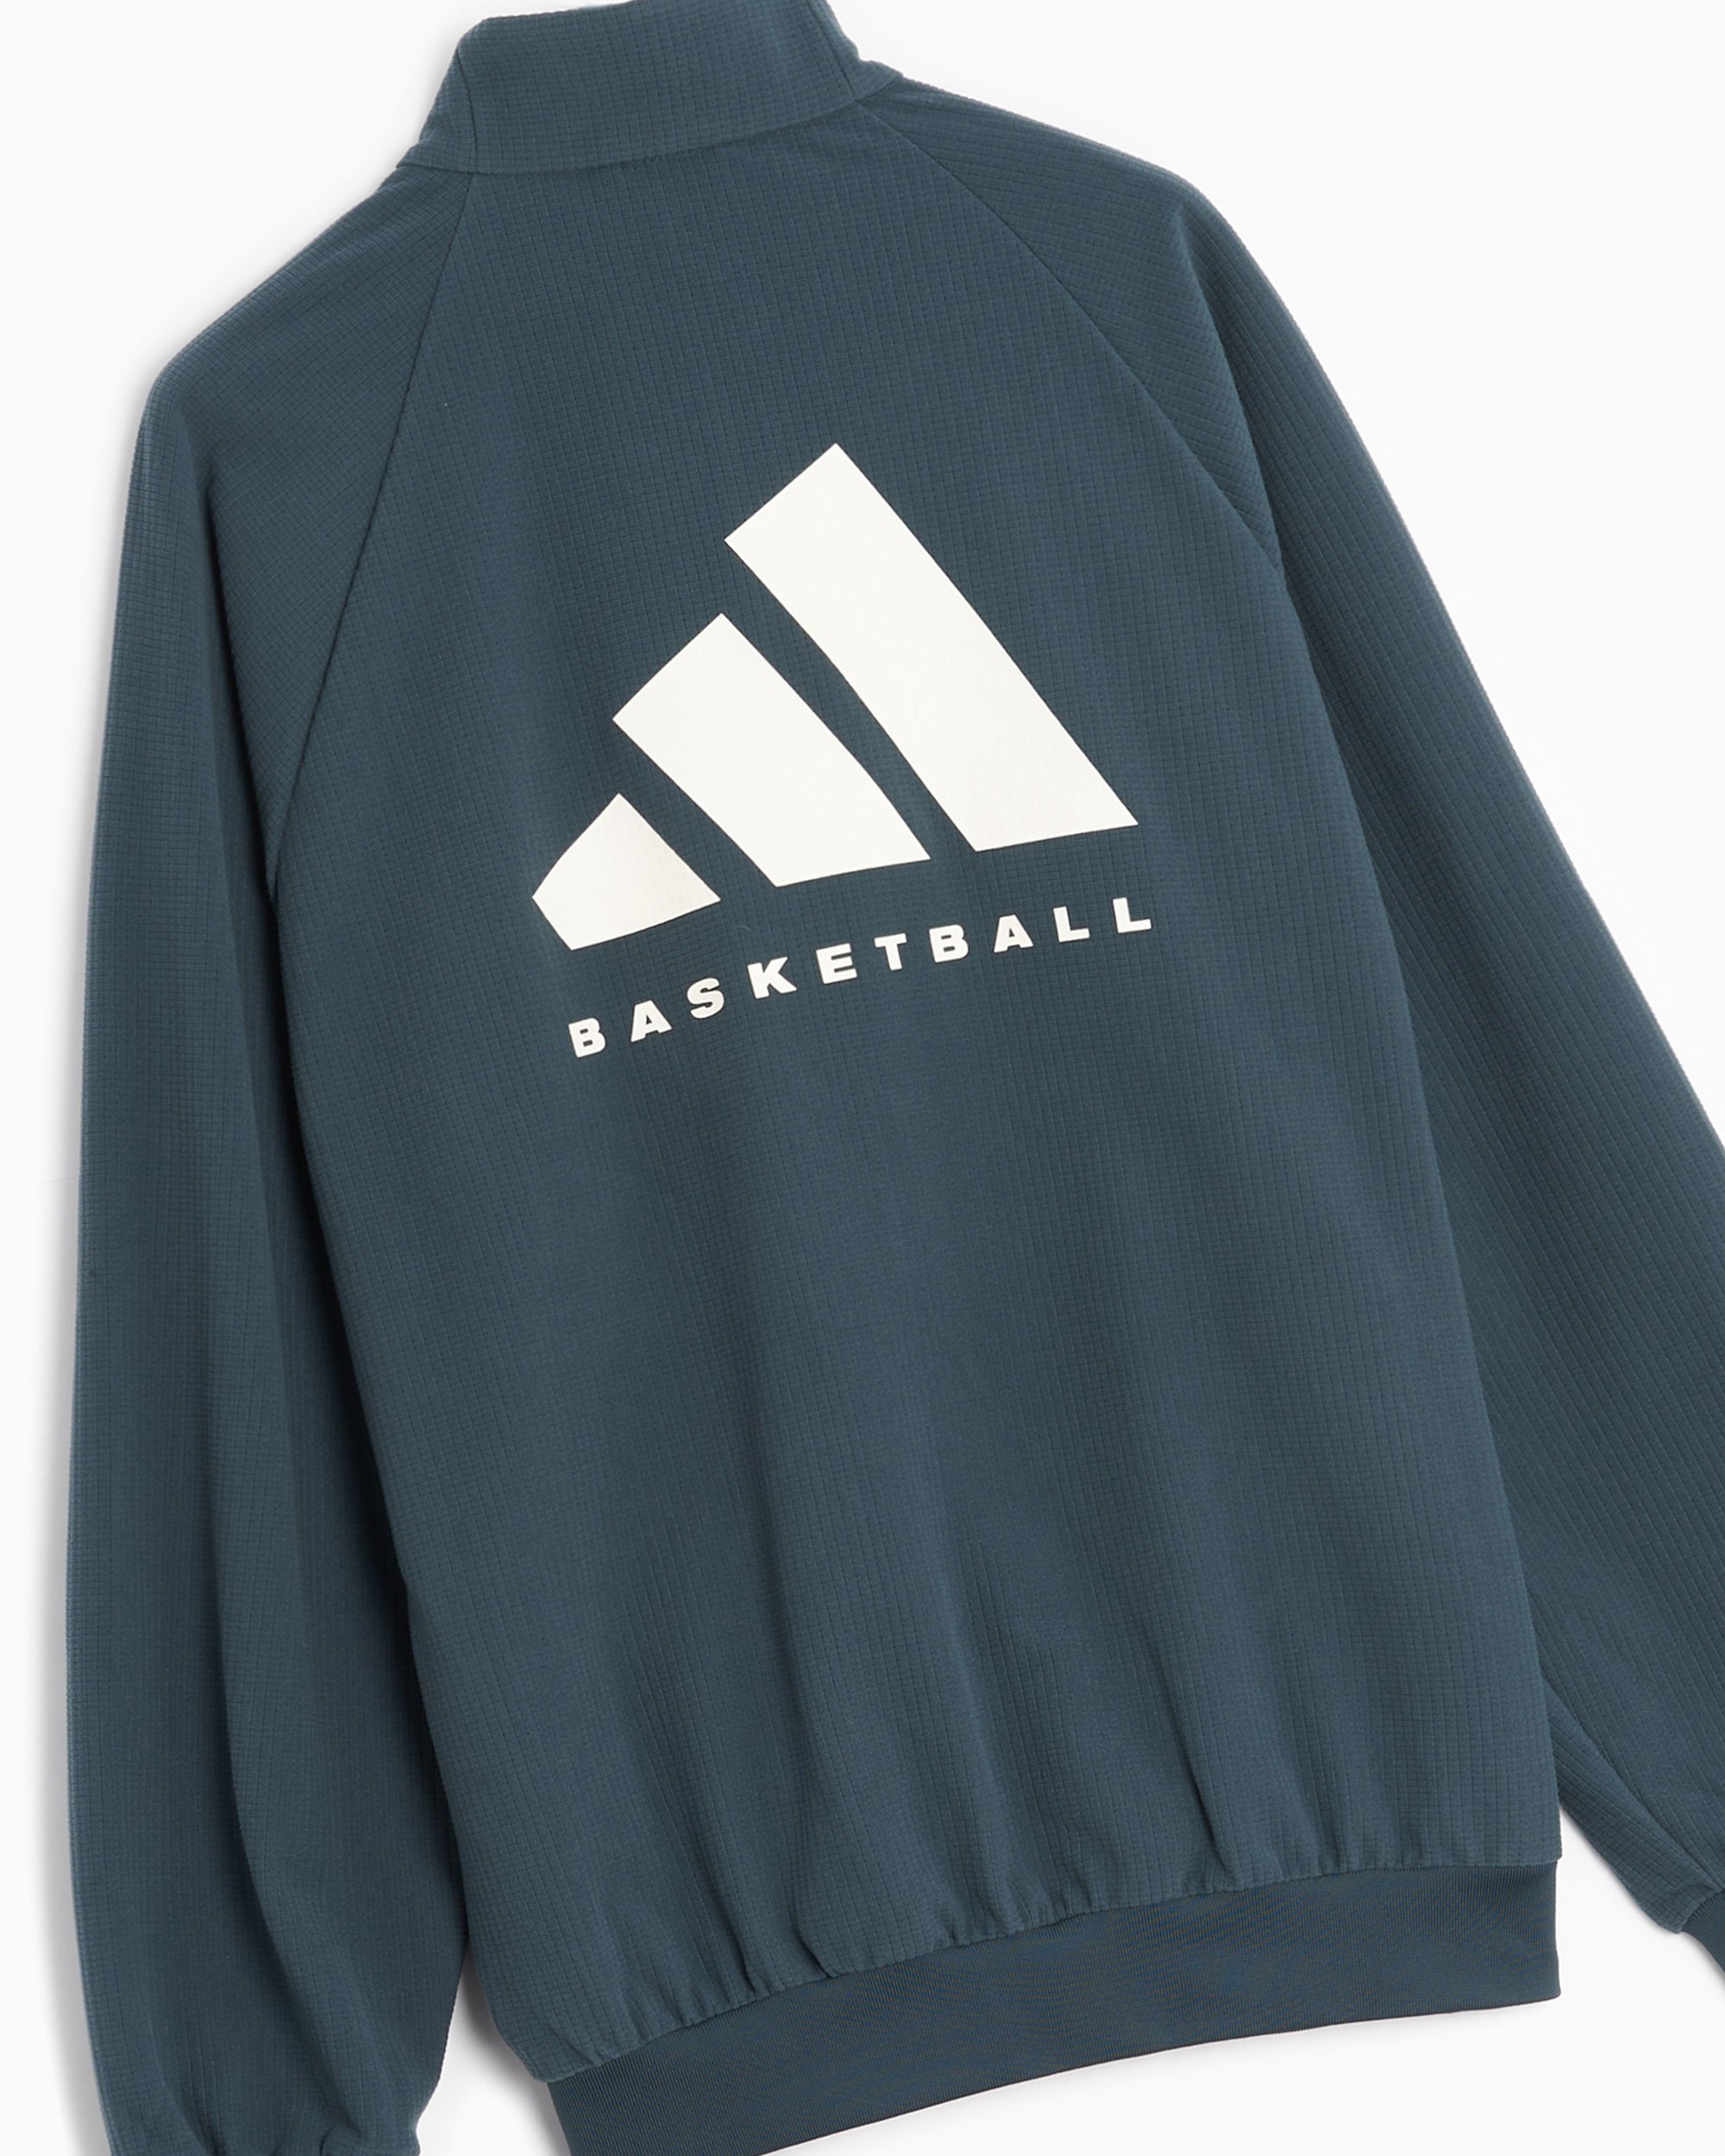 Track Basketball Jacket adidas Online Unisex One FOOTDISTRICT Green Buy at Performance IT2470|